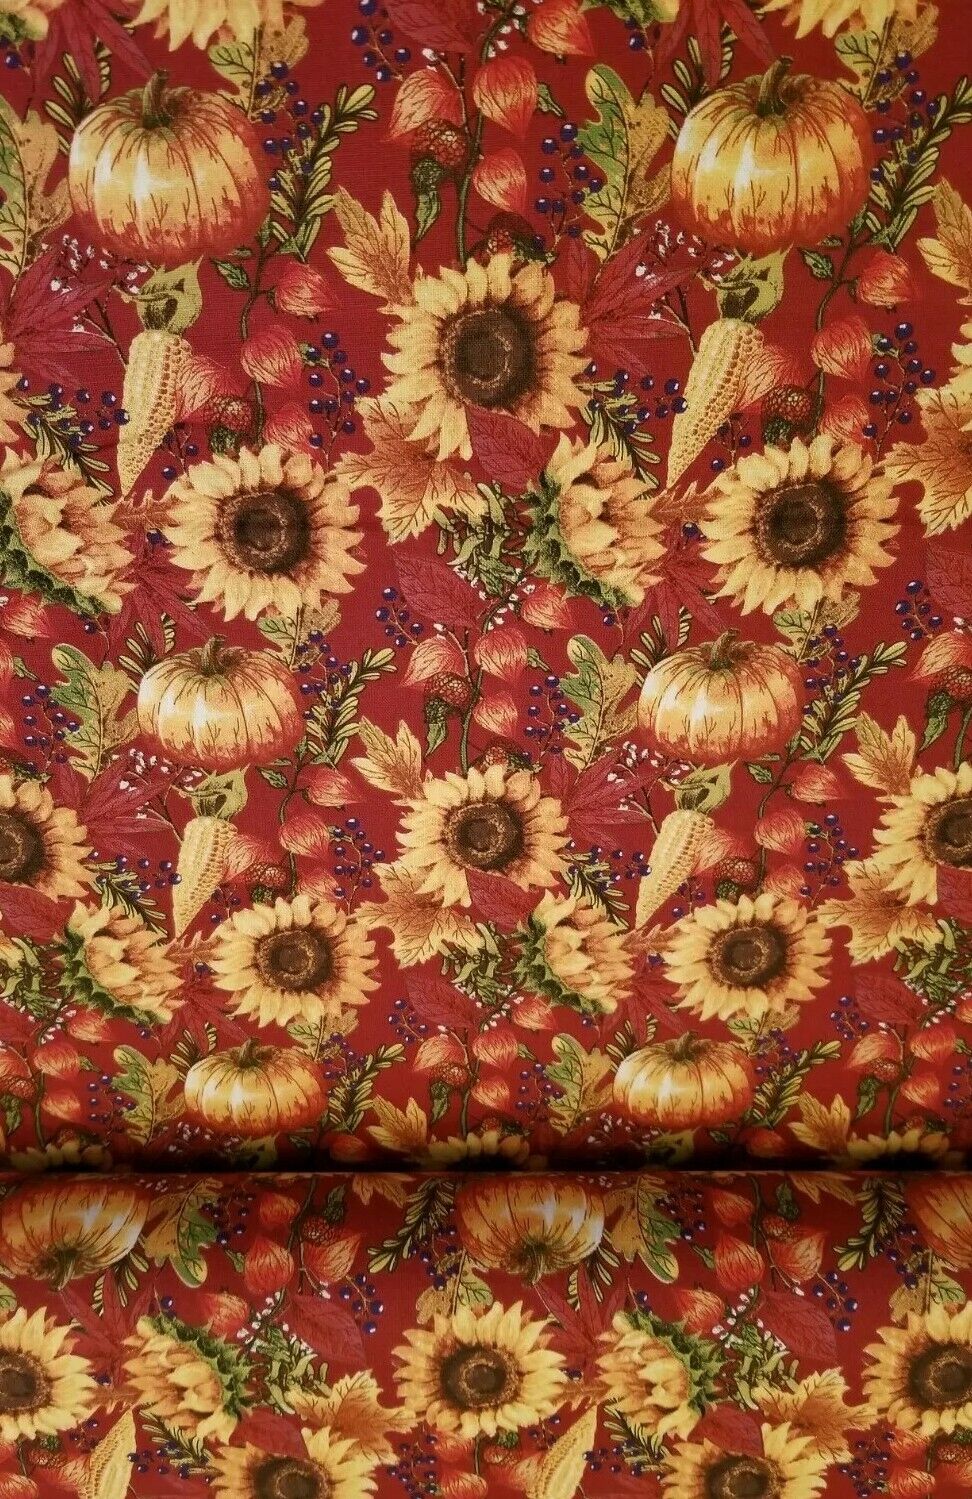 45 x 36 Pumpkins and Sunflowers on Burgundy Fall Autumn Thanksgiving 100% Cotton Fabric